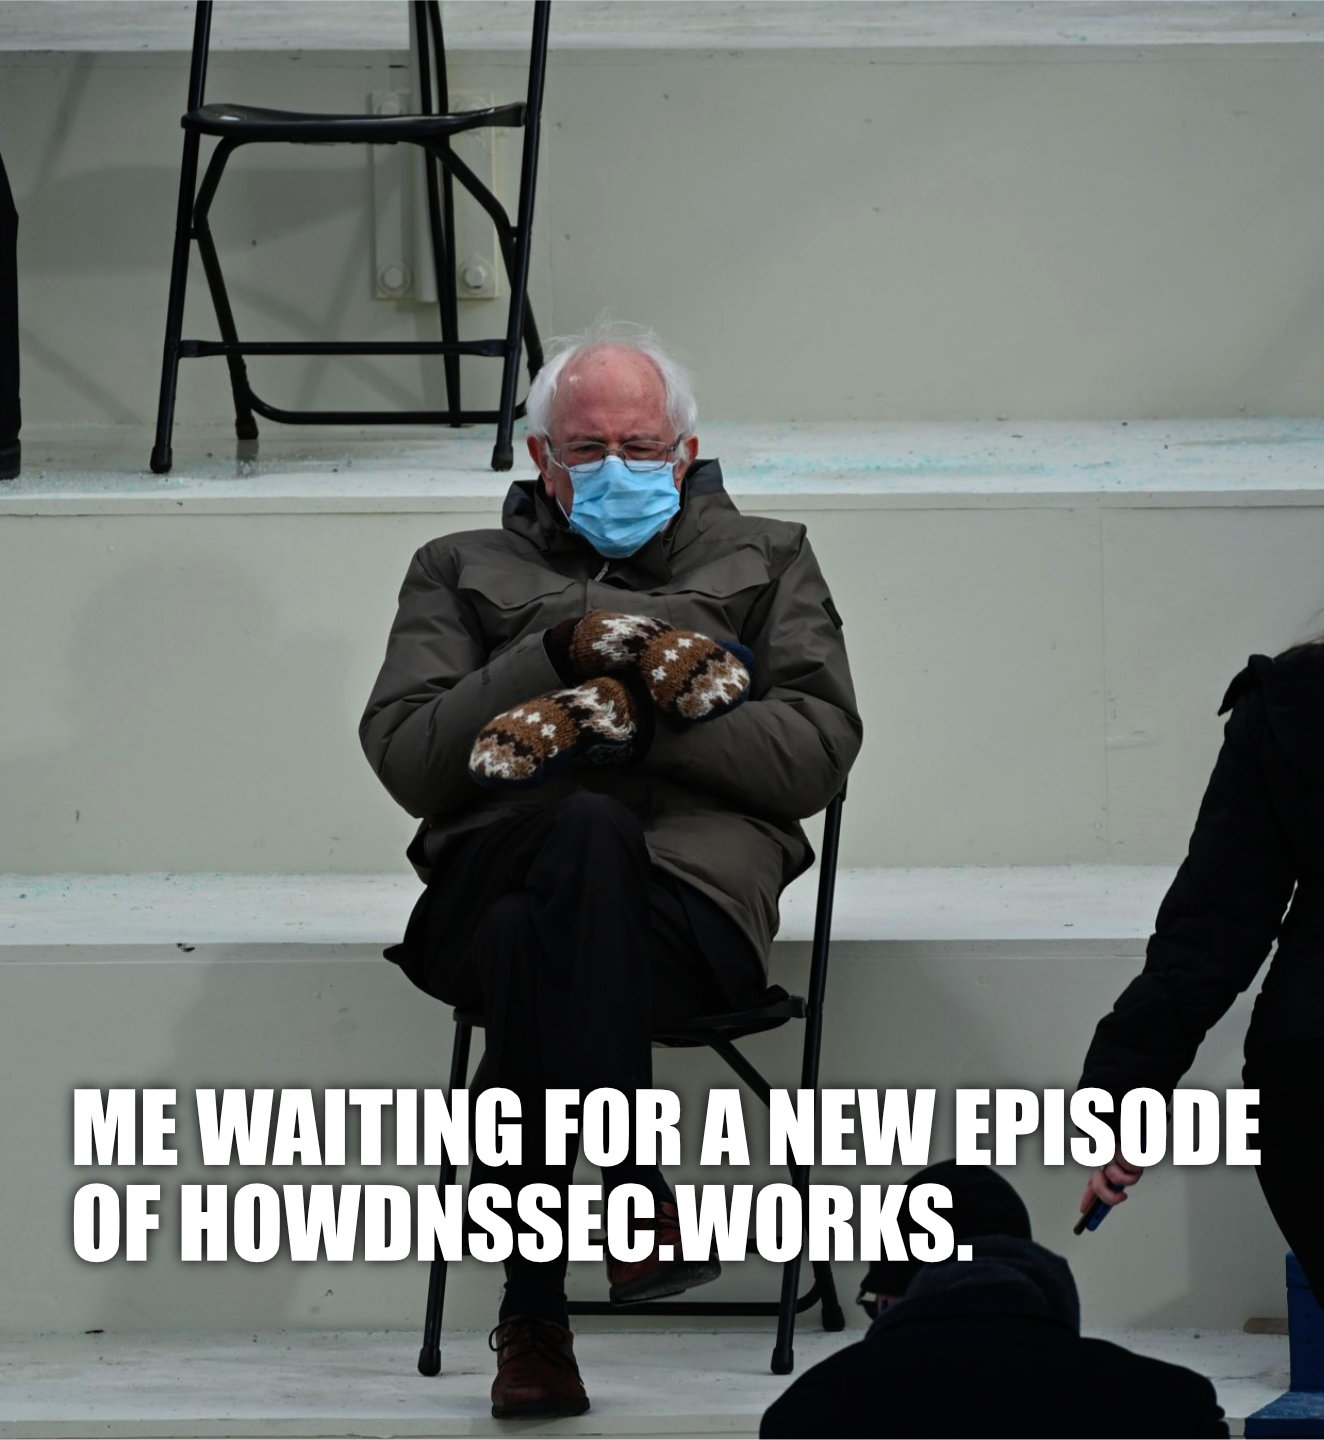 Me waiting for a new episode of HowDNSSEC.works